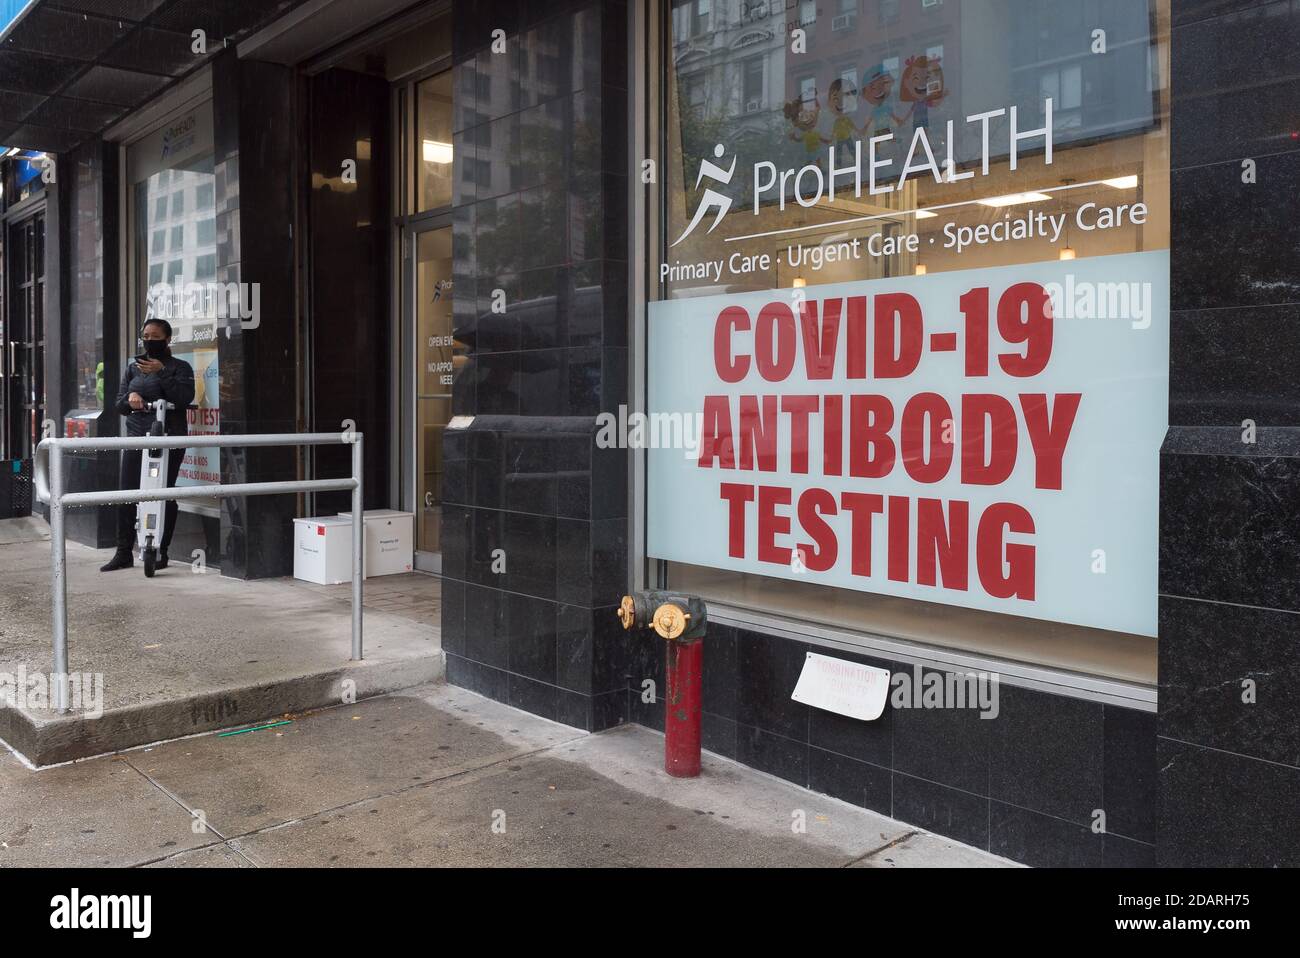 Manhattan, New York. November 13, 2020. A woman outside a clinic on 3rd avenue with a sign offering COVD-19 antibody testing. Stock Photo